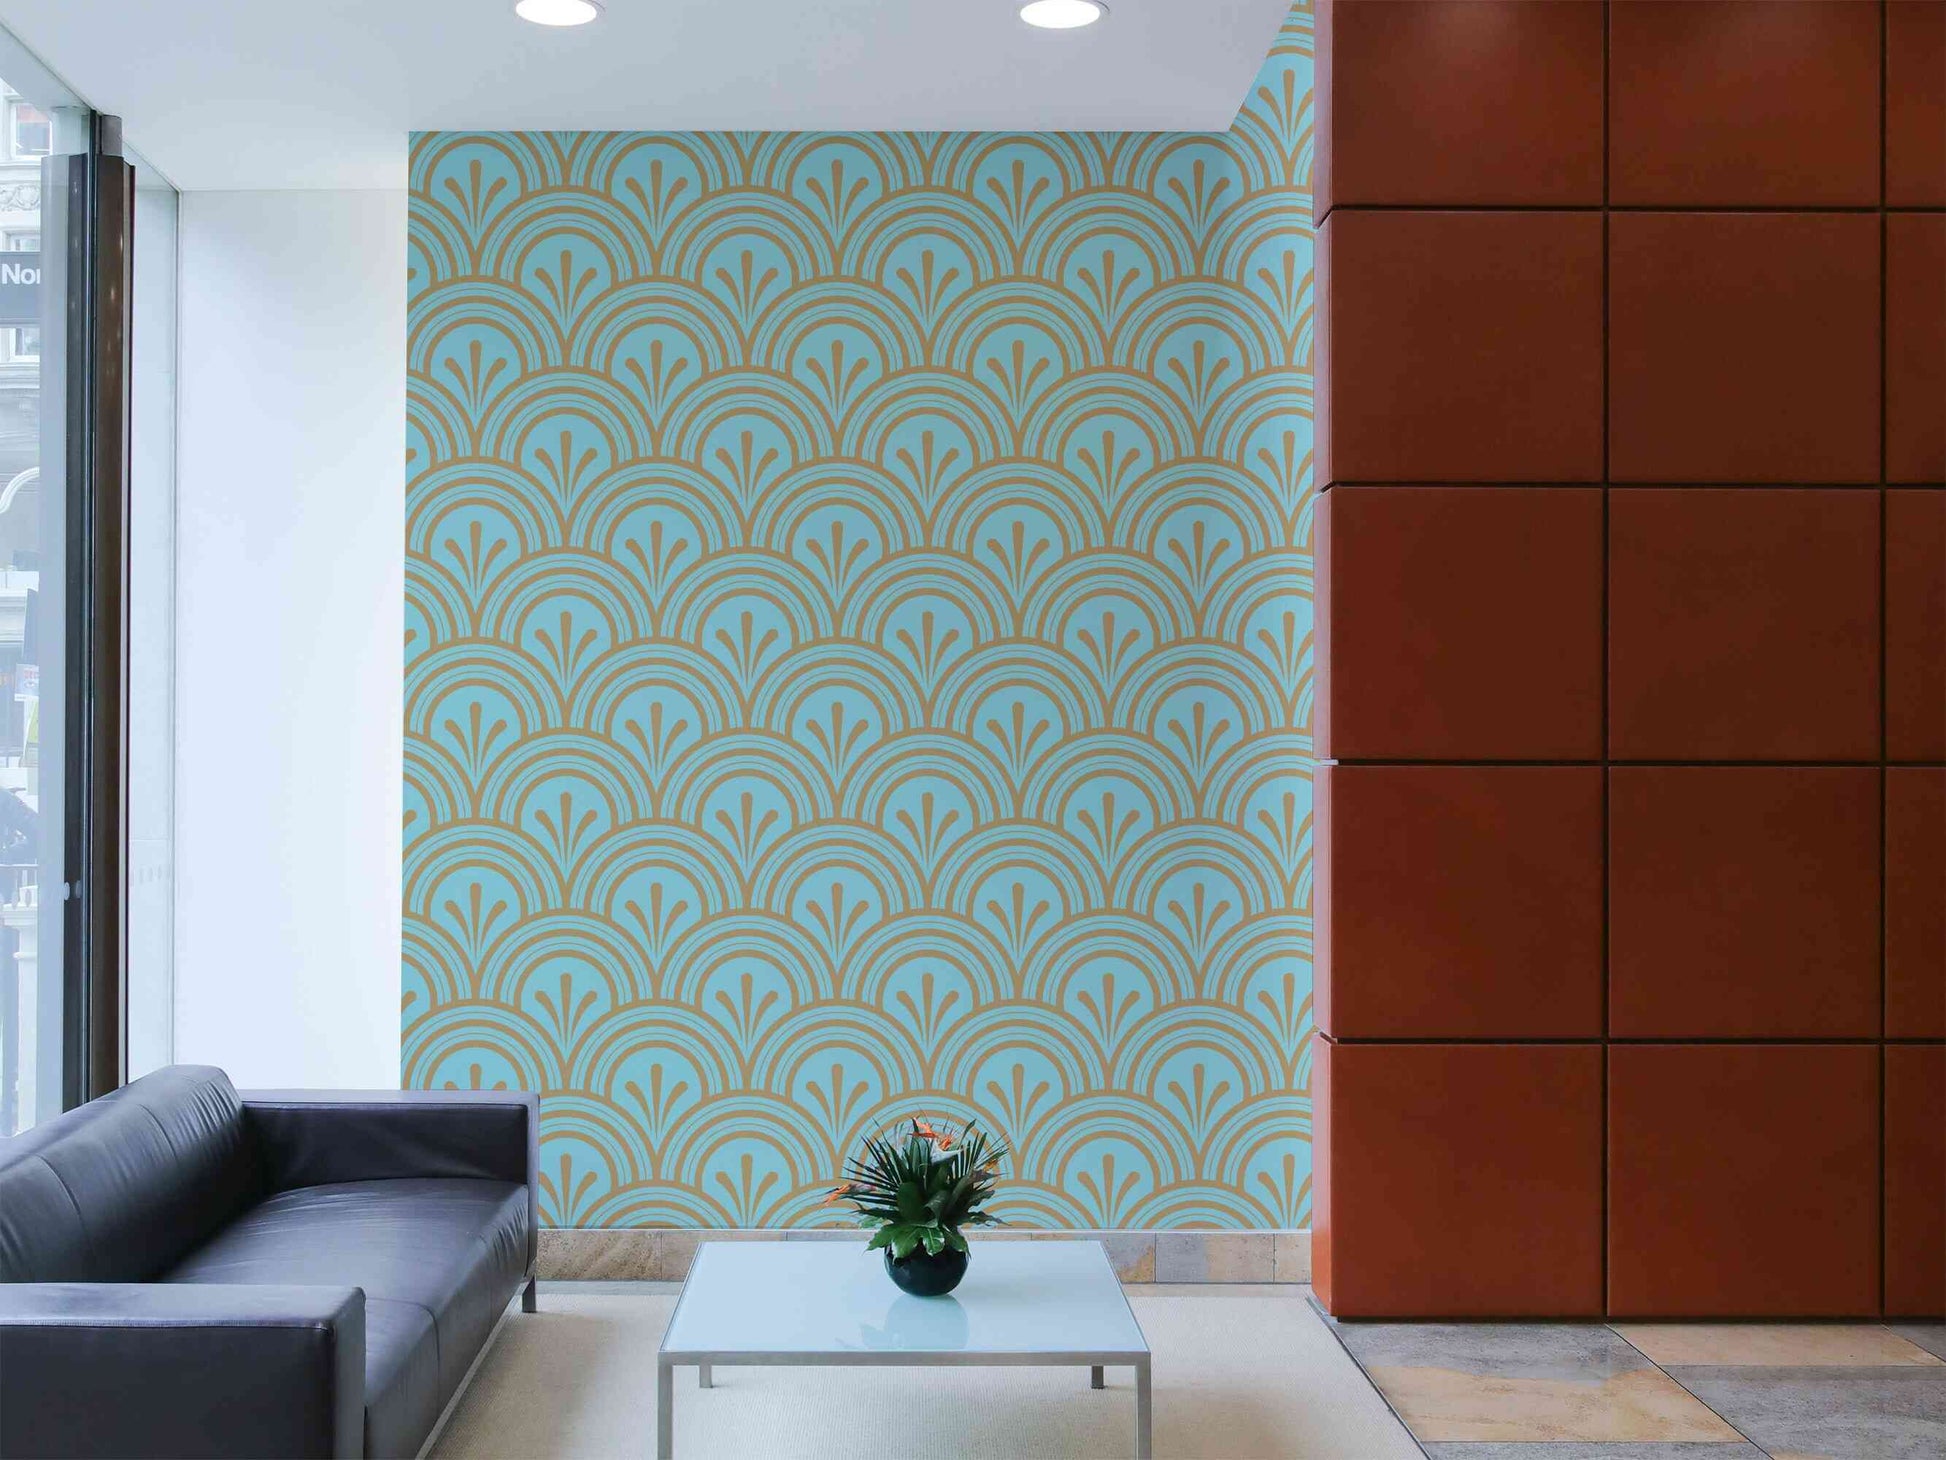 Peel and Stick Wall Murals offering a hassle-free application process.